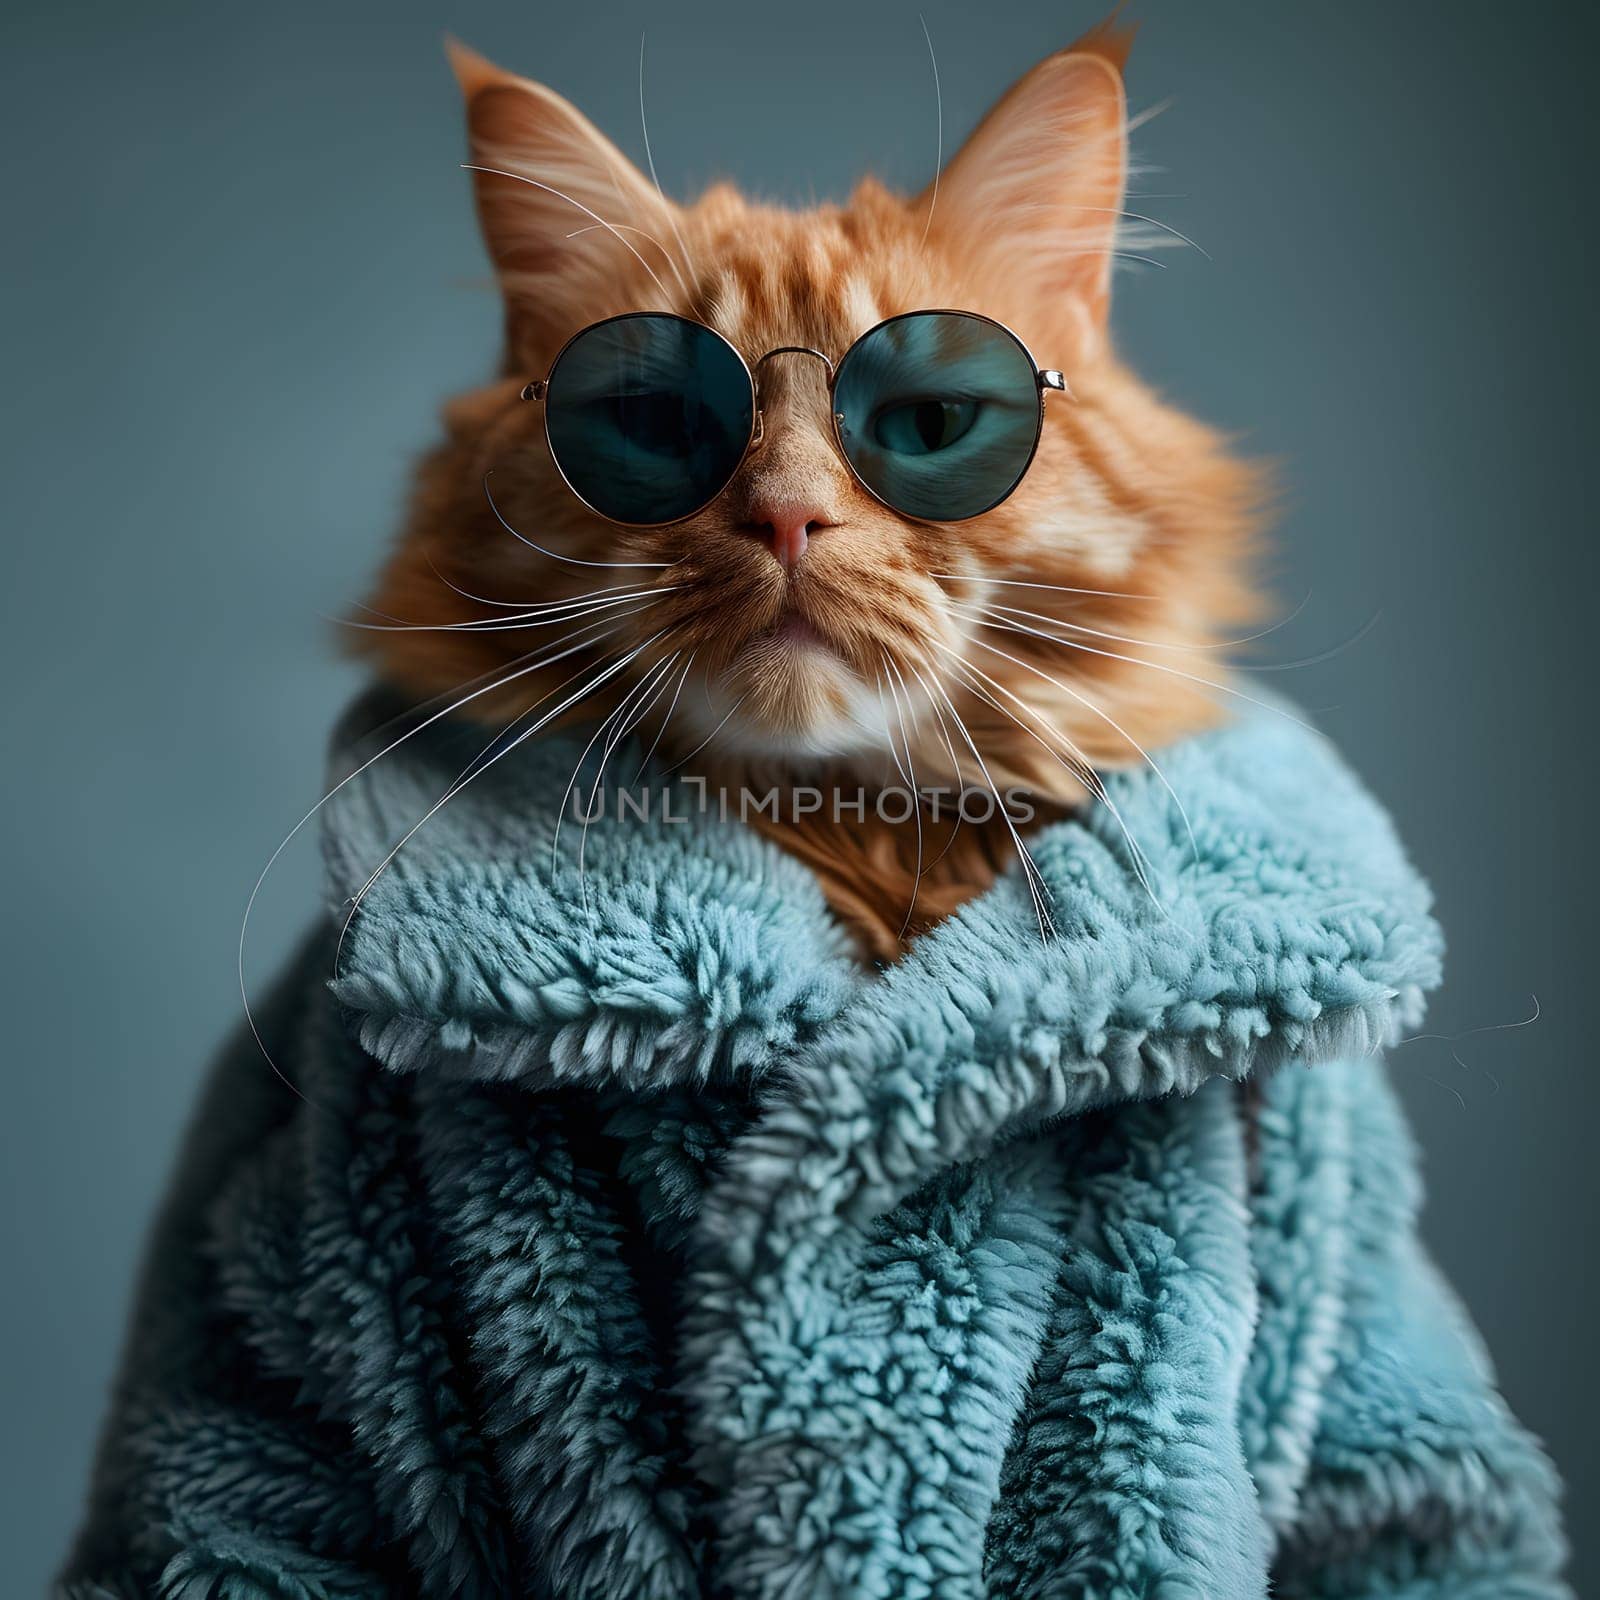 A stylish Felidae with fur coat and sunglasses, showcasing its whiskers and bright eye iris. This carnivorous cat exudes confidence with a cool attitude